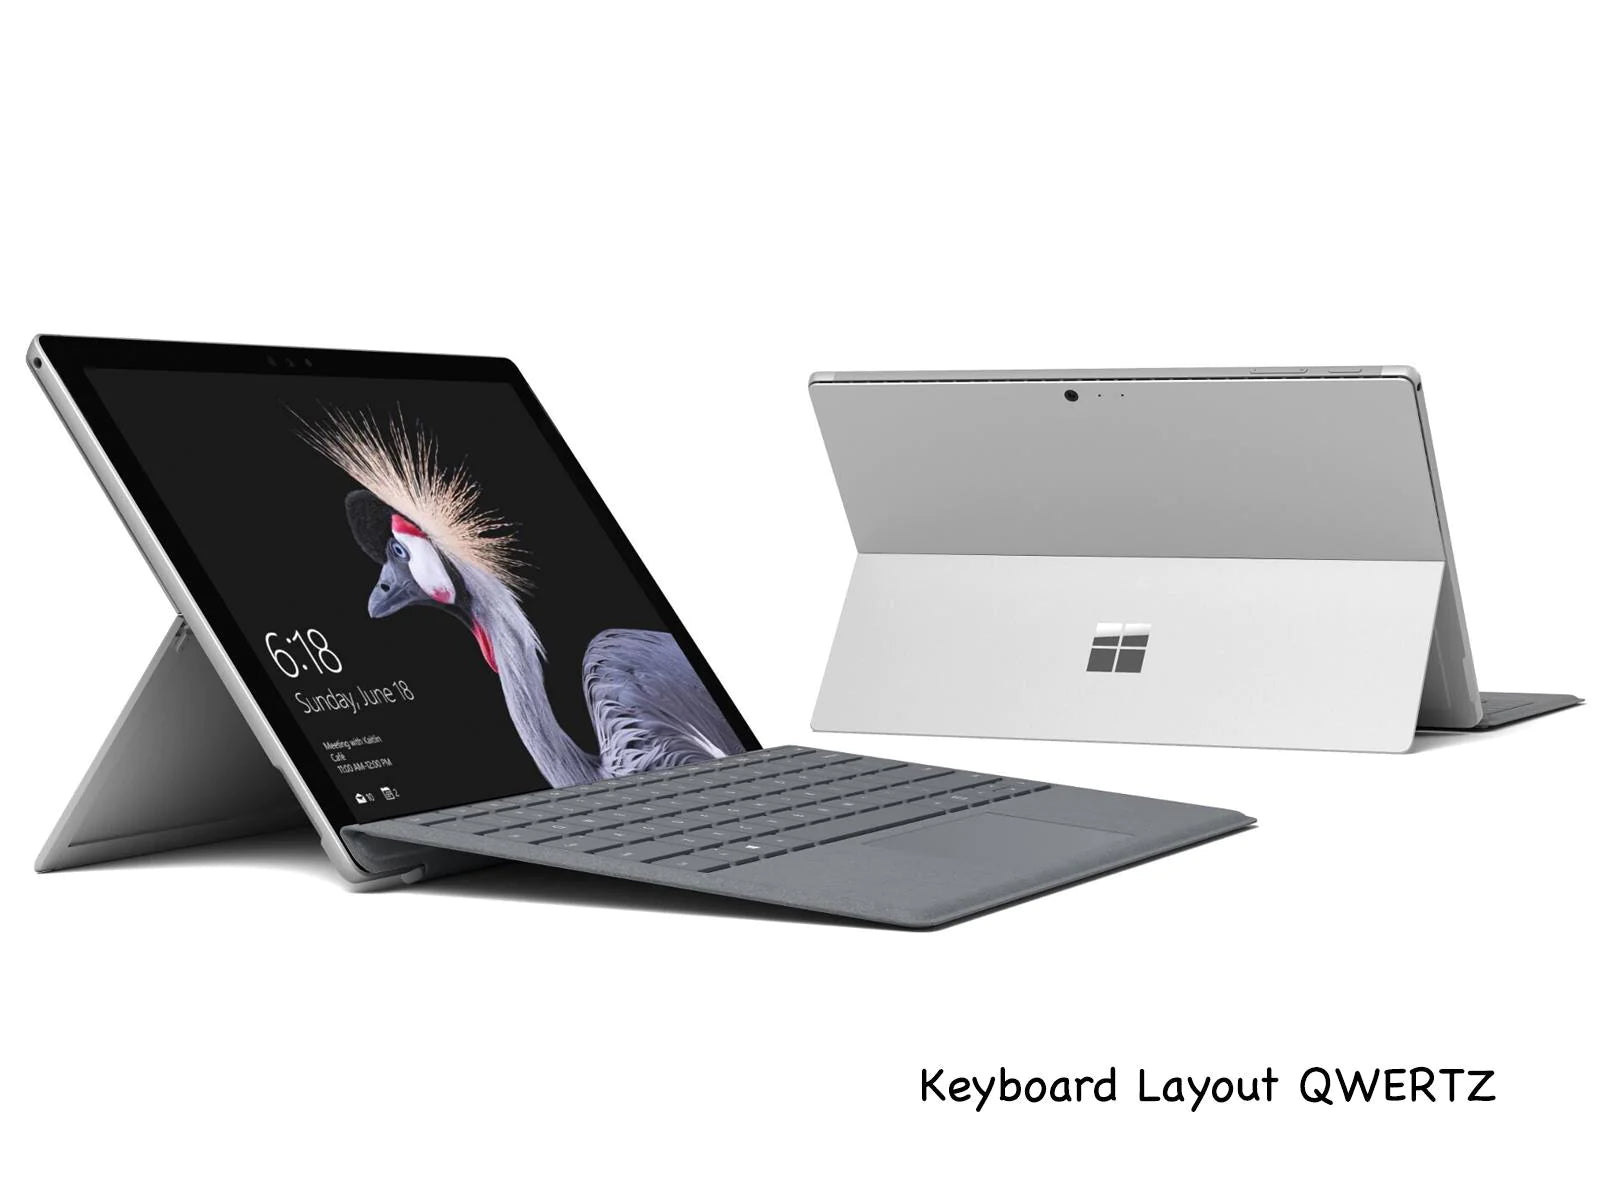 Left side view of the notebook microsoft surface pro with back view of the laptop too on the white background